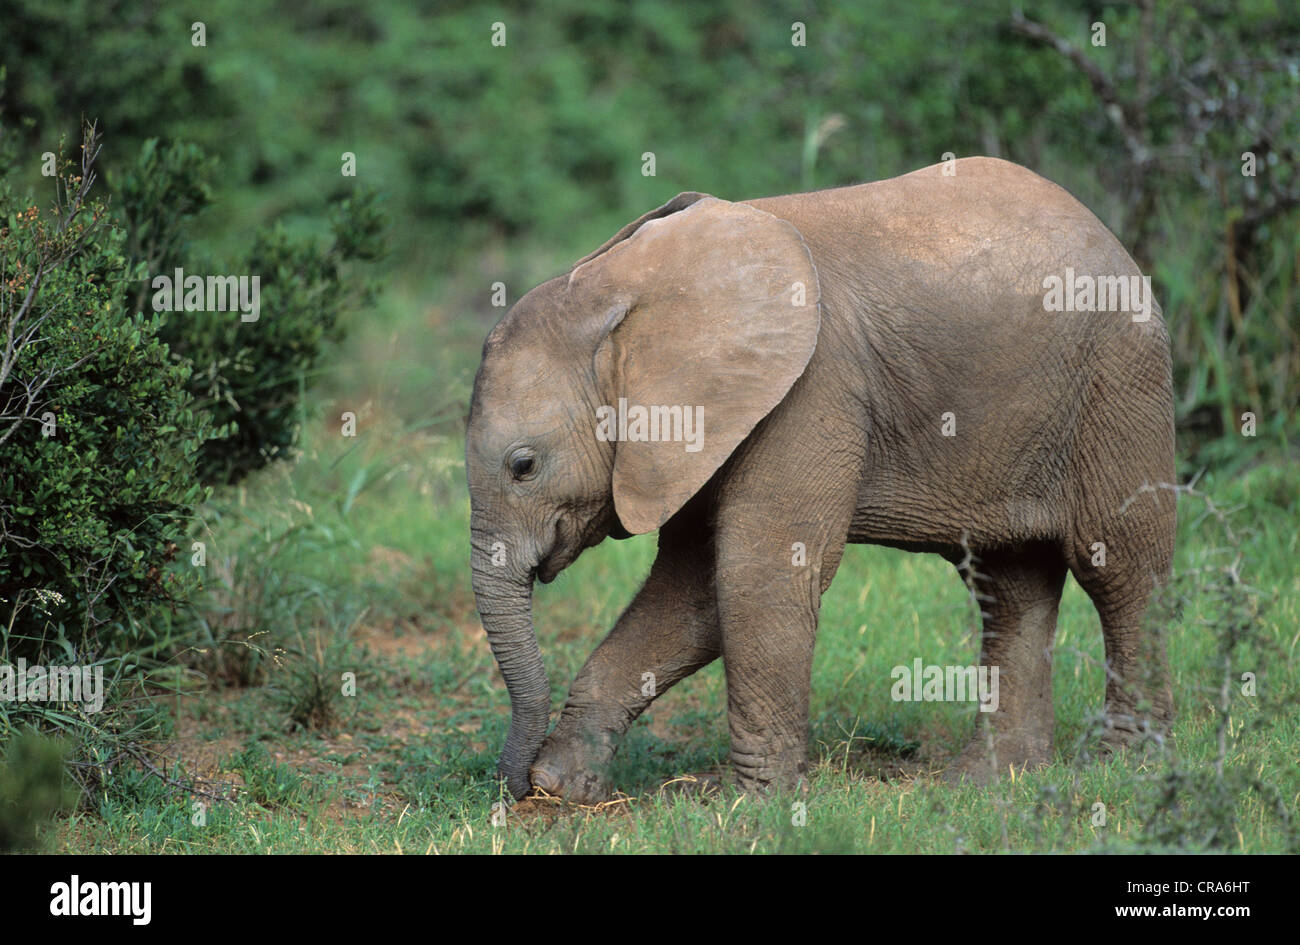 African Elephant (Loxodonta africana), young, Addo Elephant National Park, South Africa, Africa Stock Photo